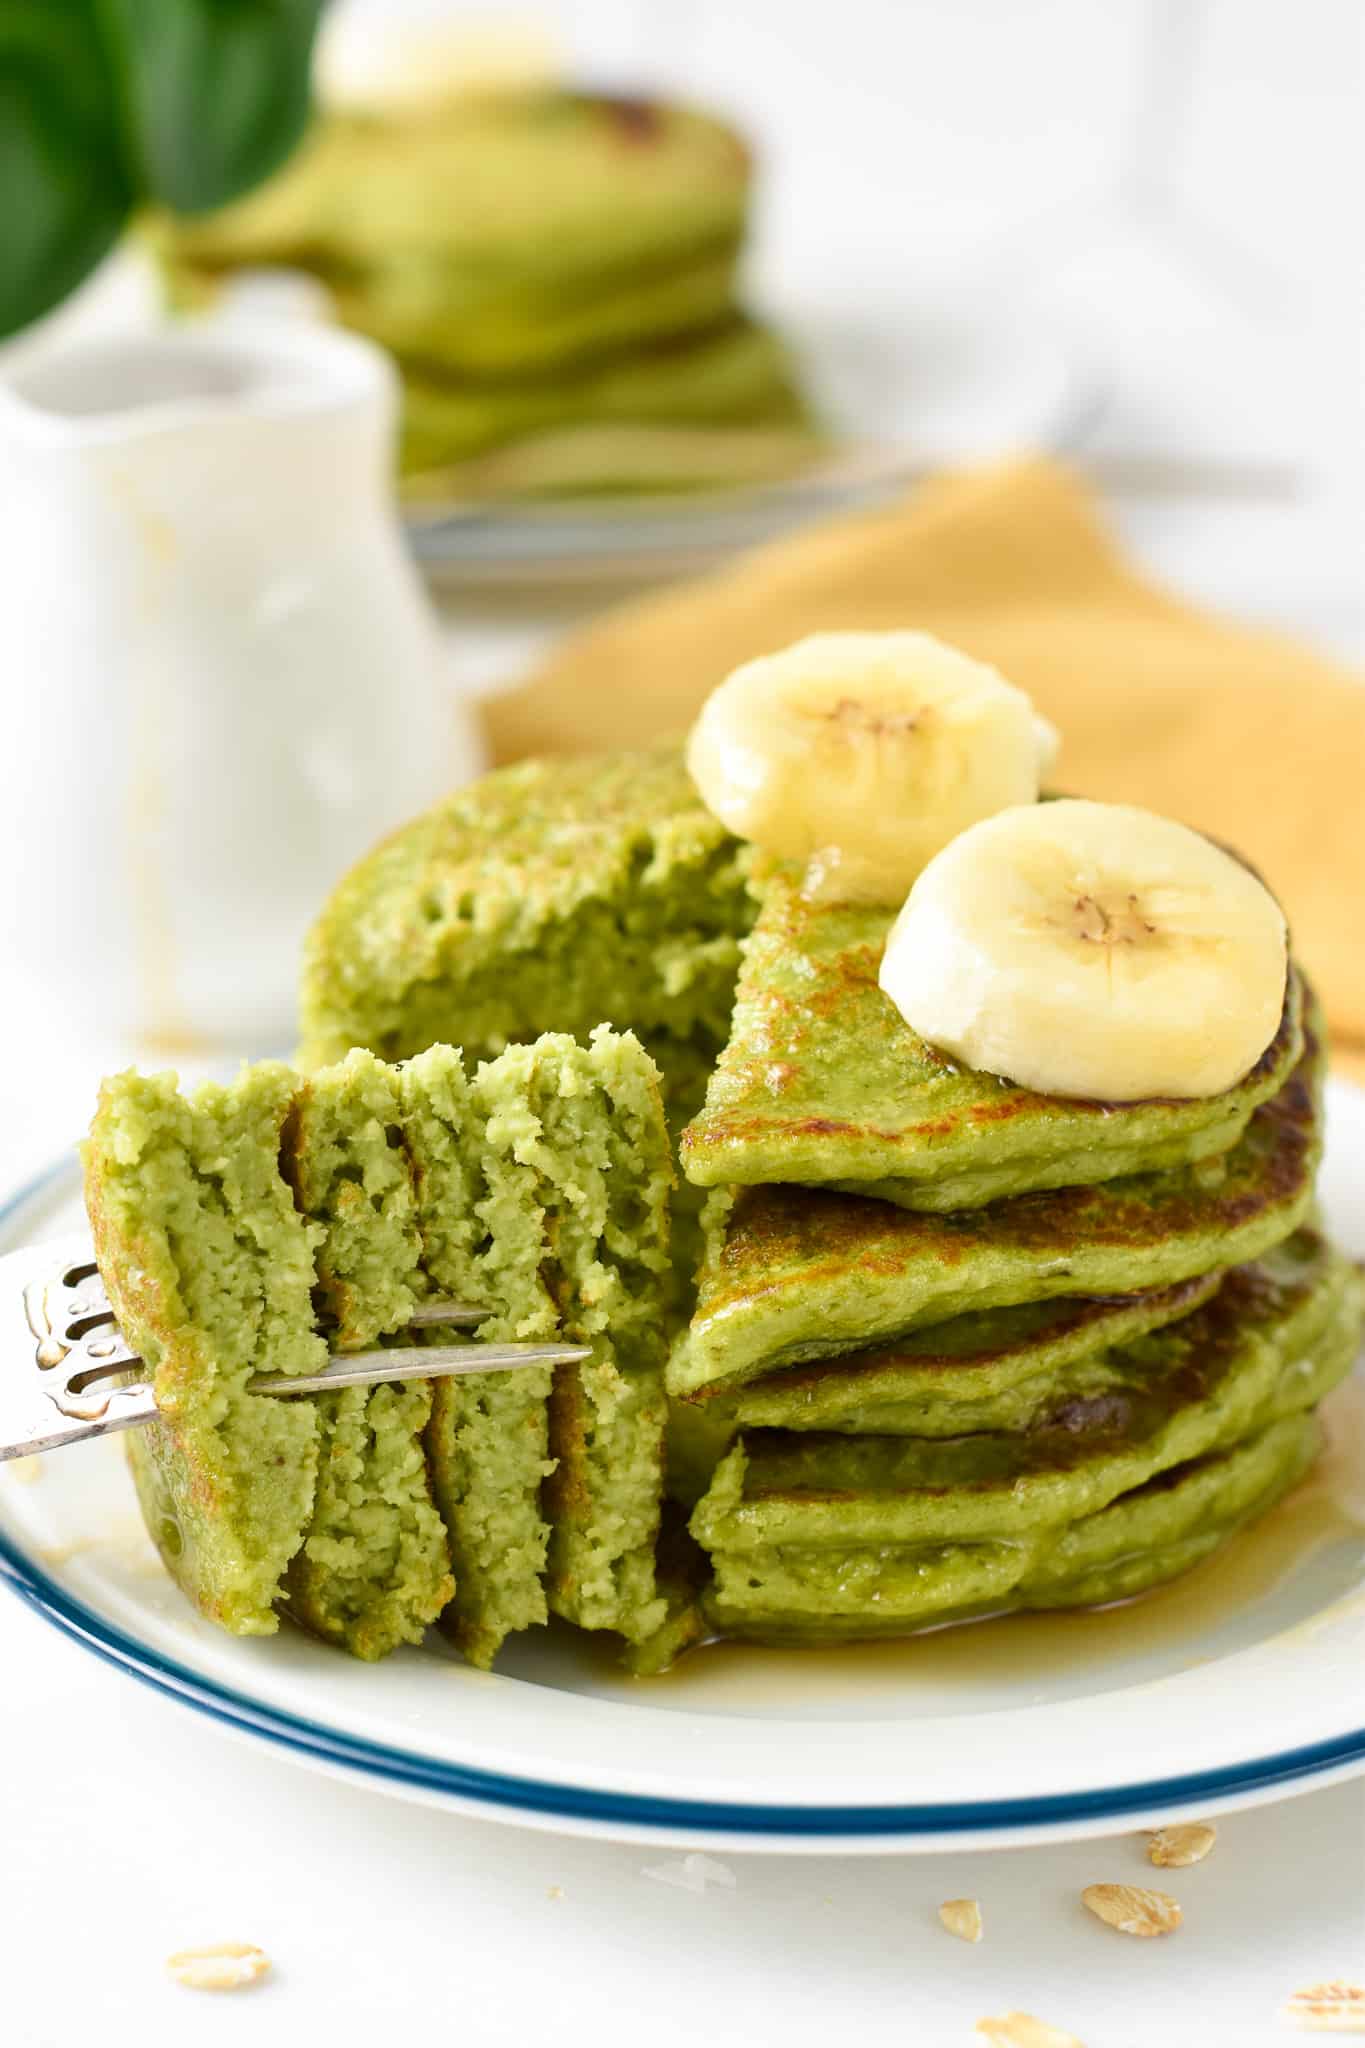 a stack of Spinach banana oat pancake with a fork holding a piece of the stack showing the vibrant green inside